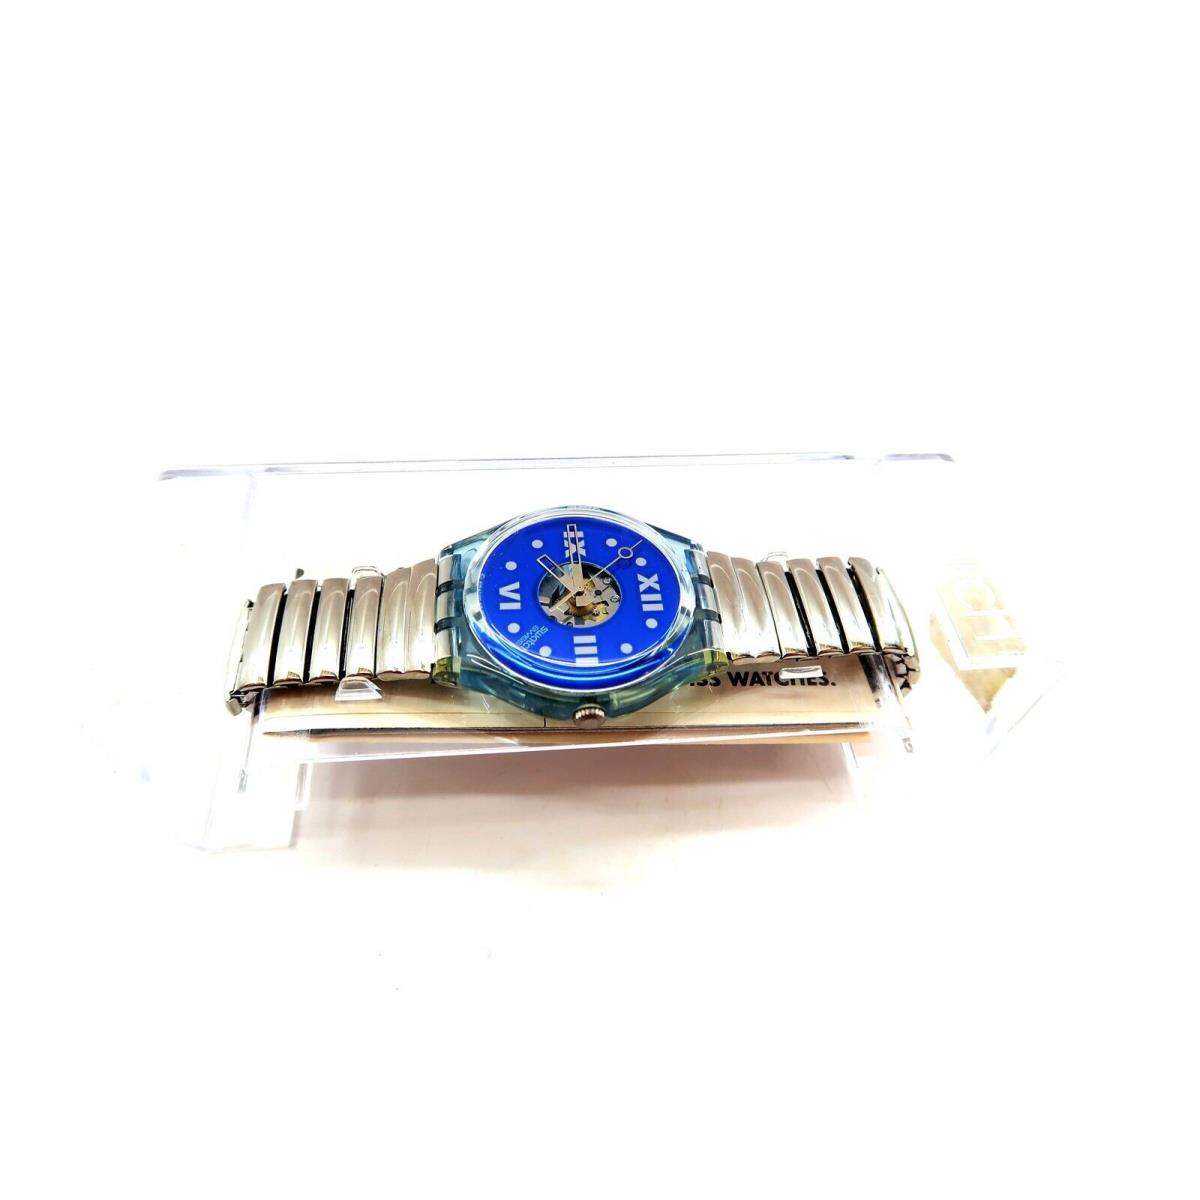 Swatch Watch Saphire Shade GN110 / 111 with Case and Papers 1991 Gents Nos